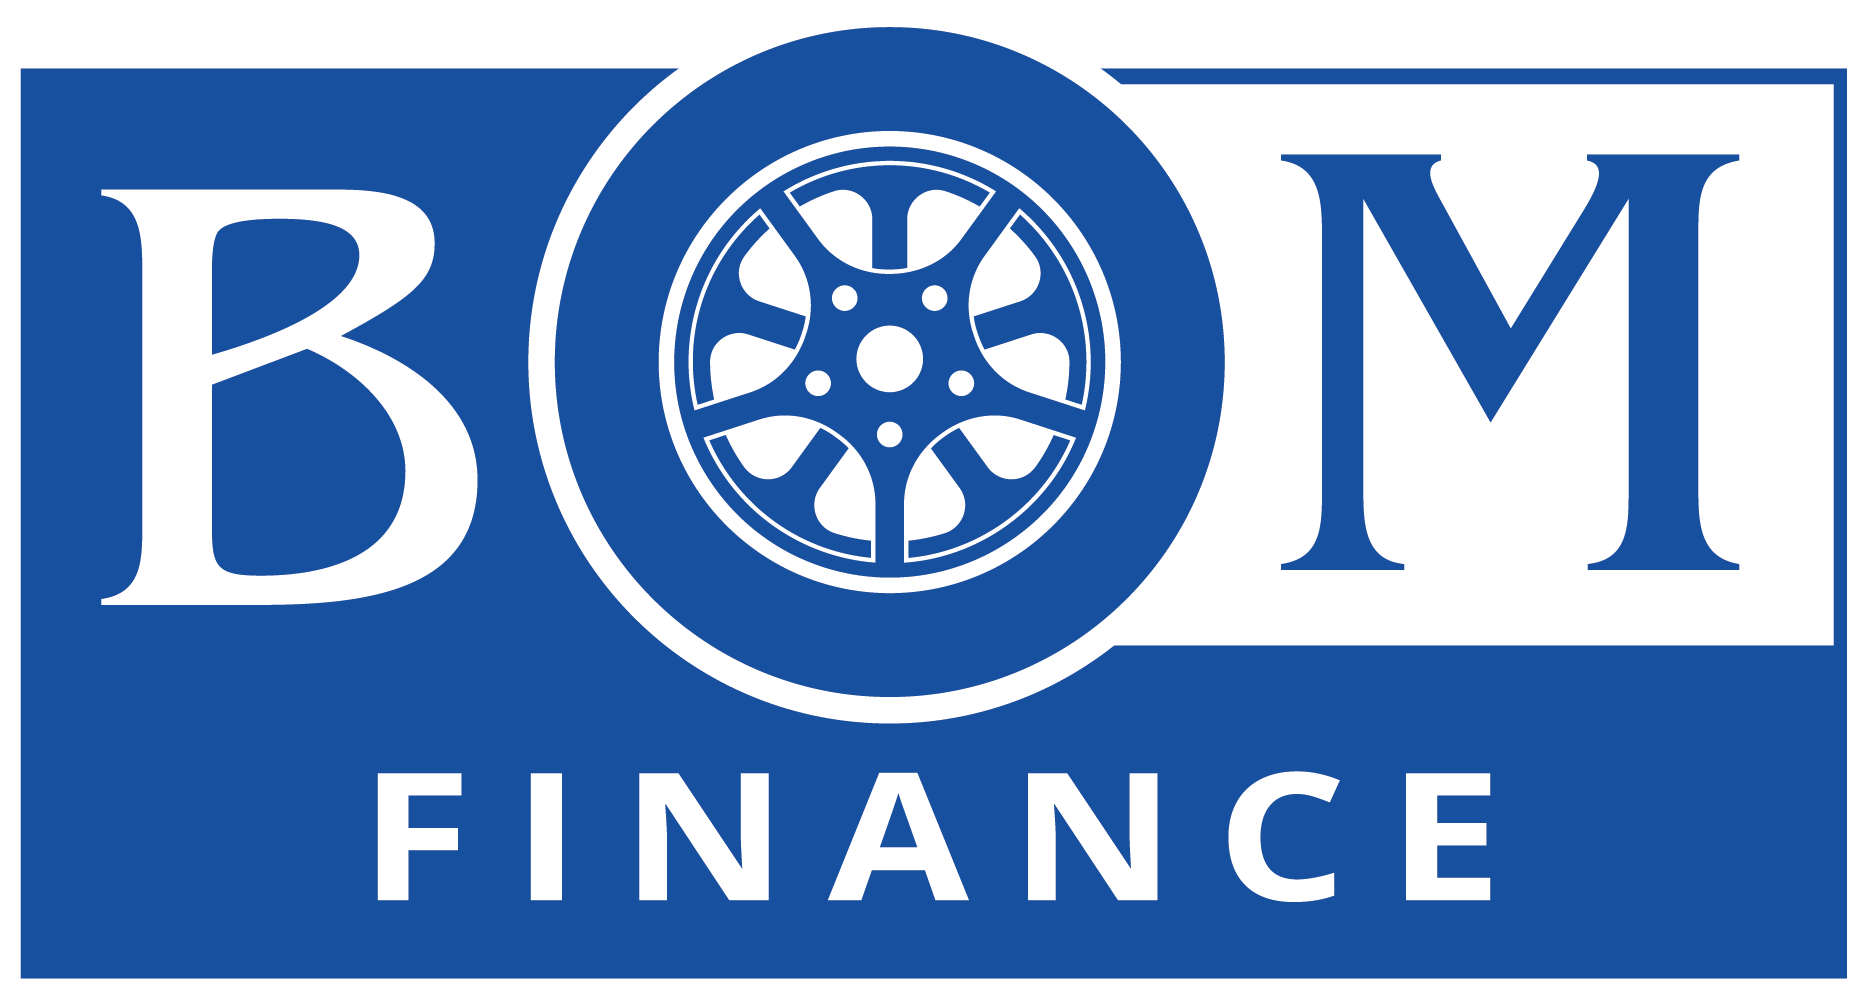 Bay Country Financial Services Footer Logo